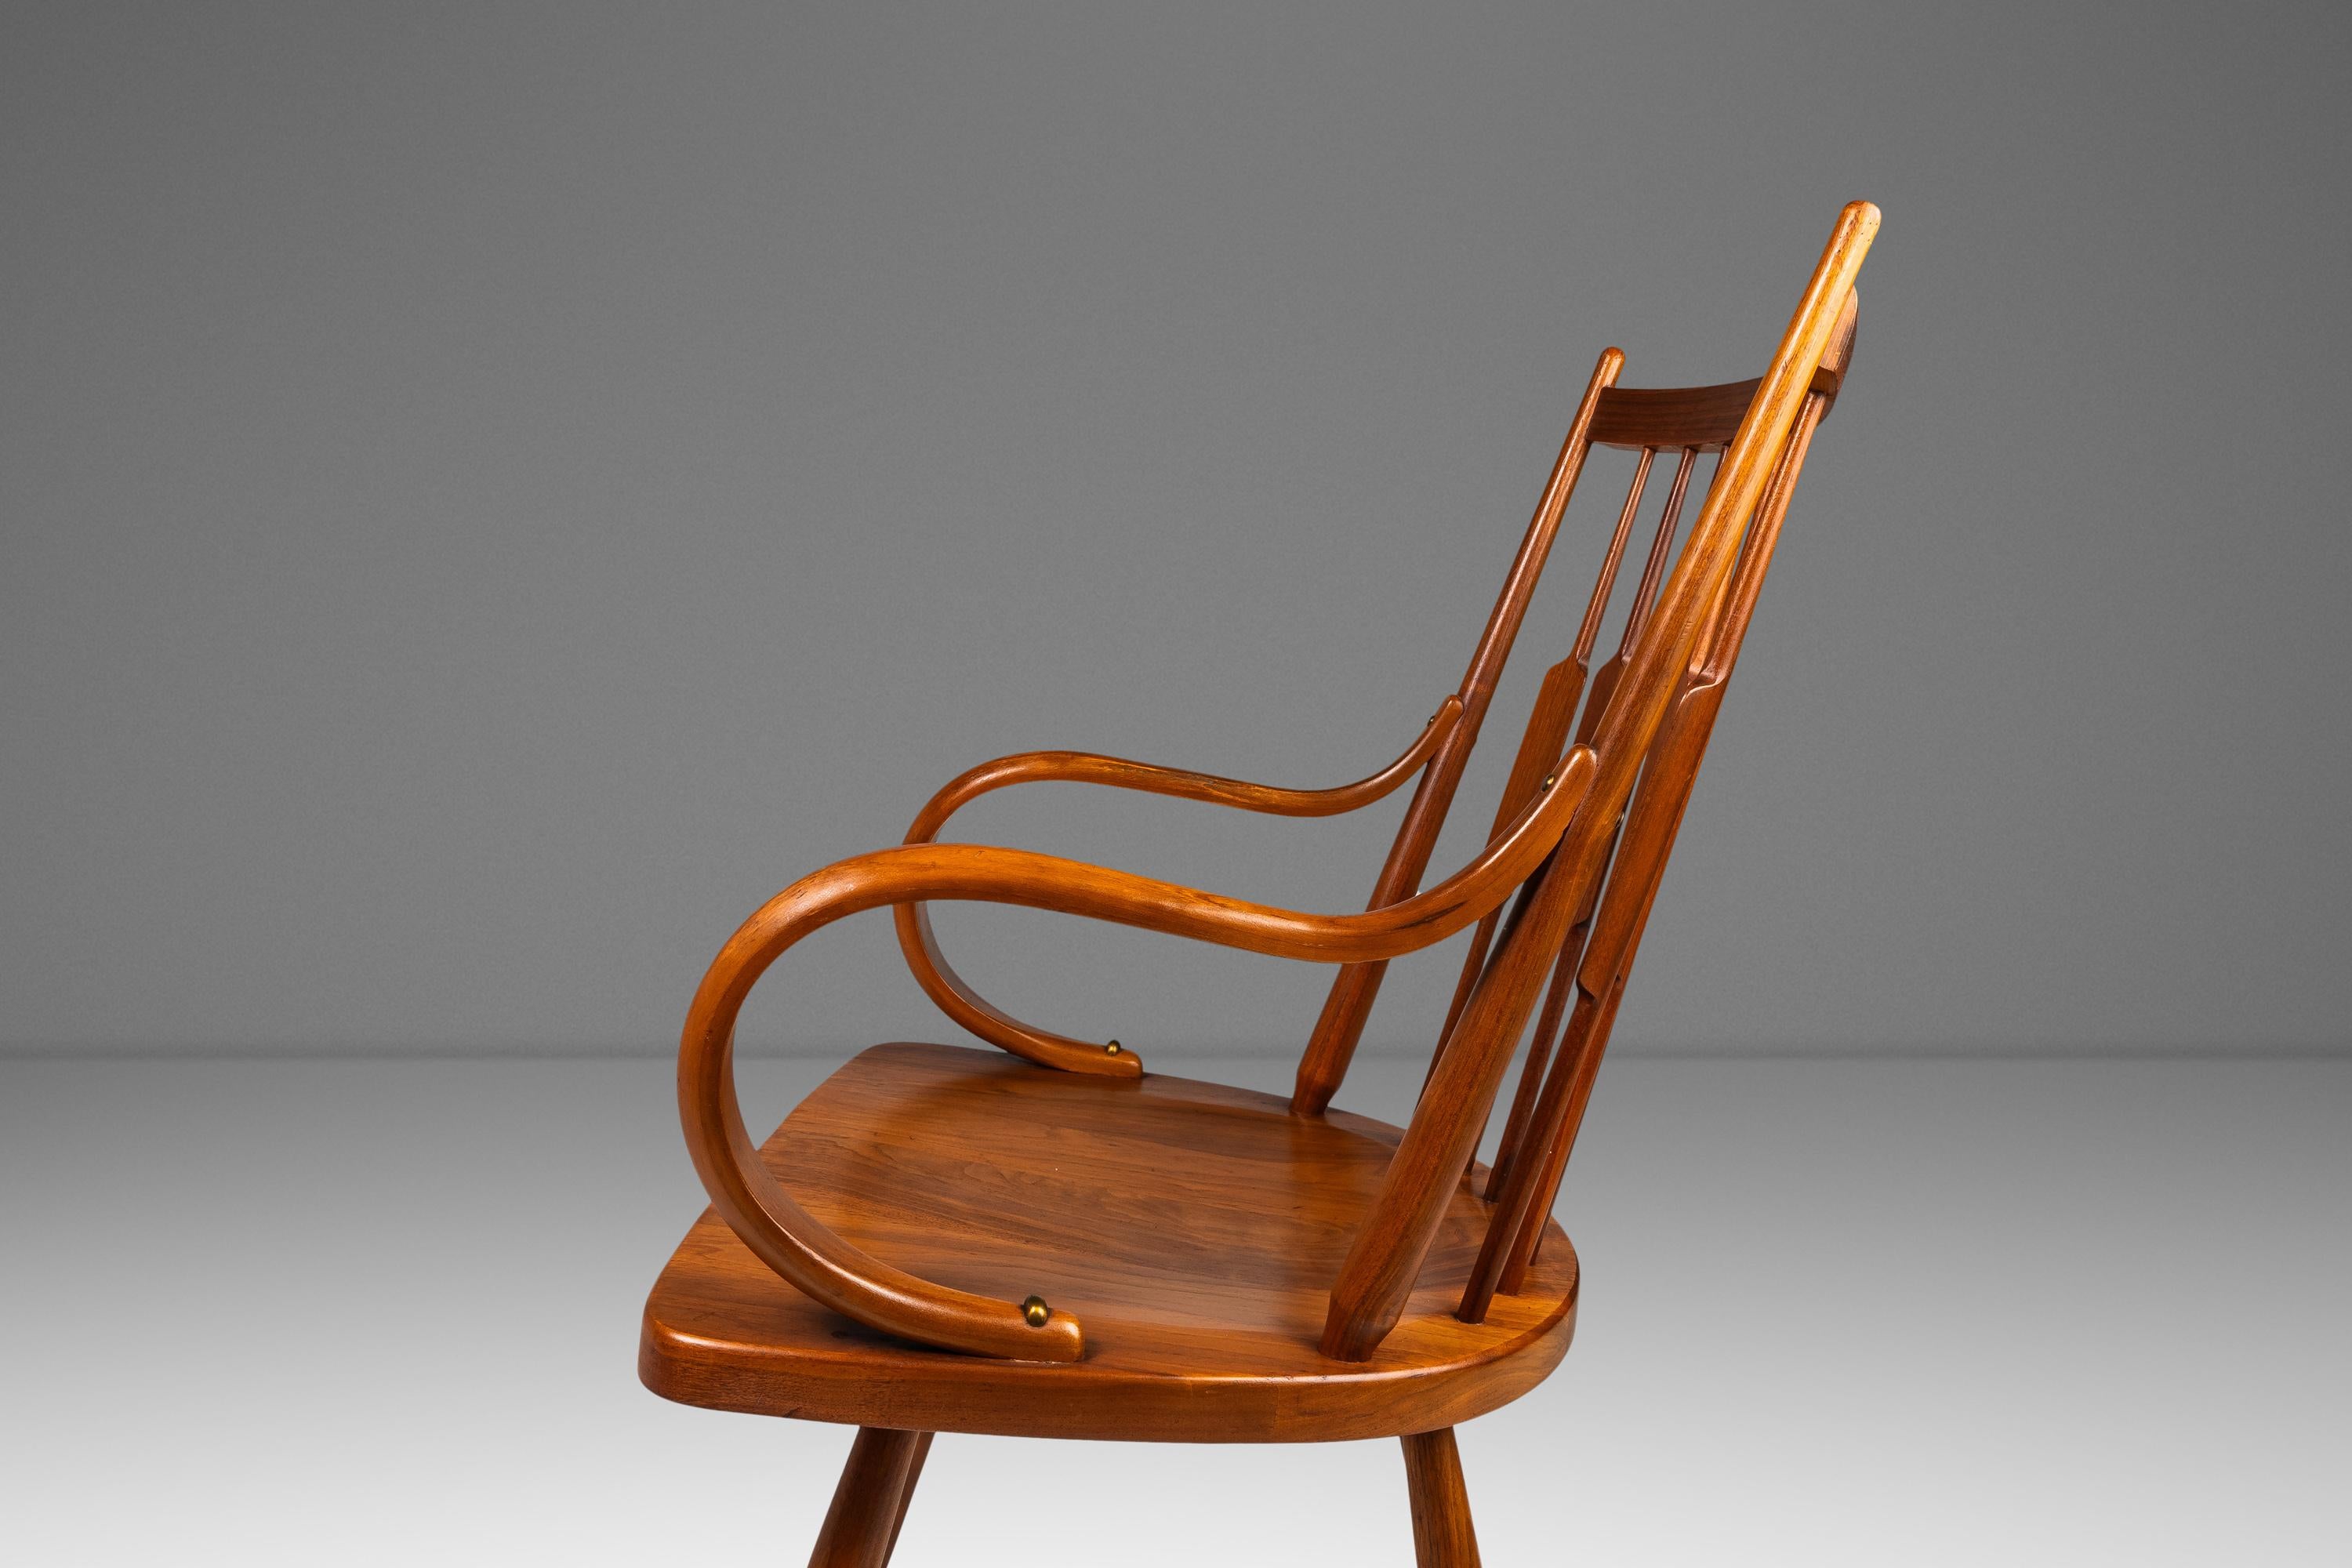 Set of 2 Windsor Chairs in Solid Walnut by Kipp Stewart for Drexel, USA, c. 1960 For Sale 9